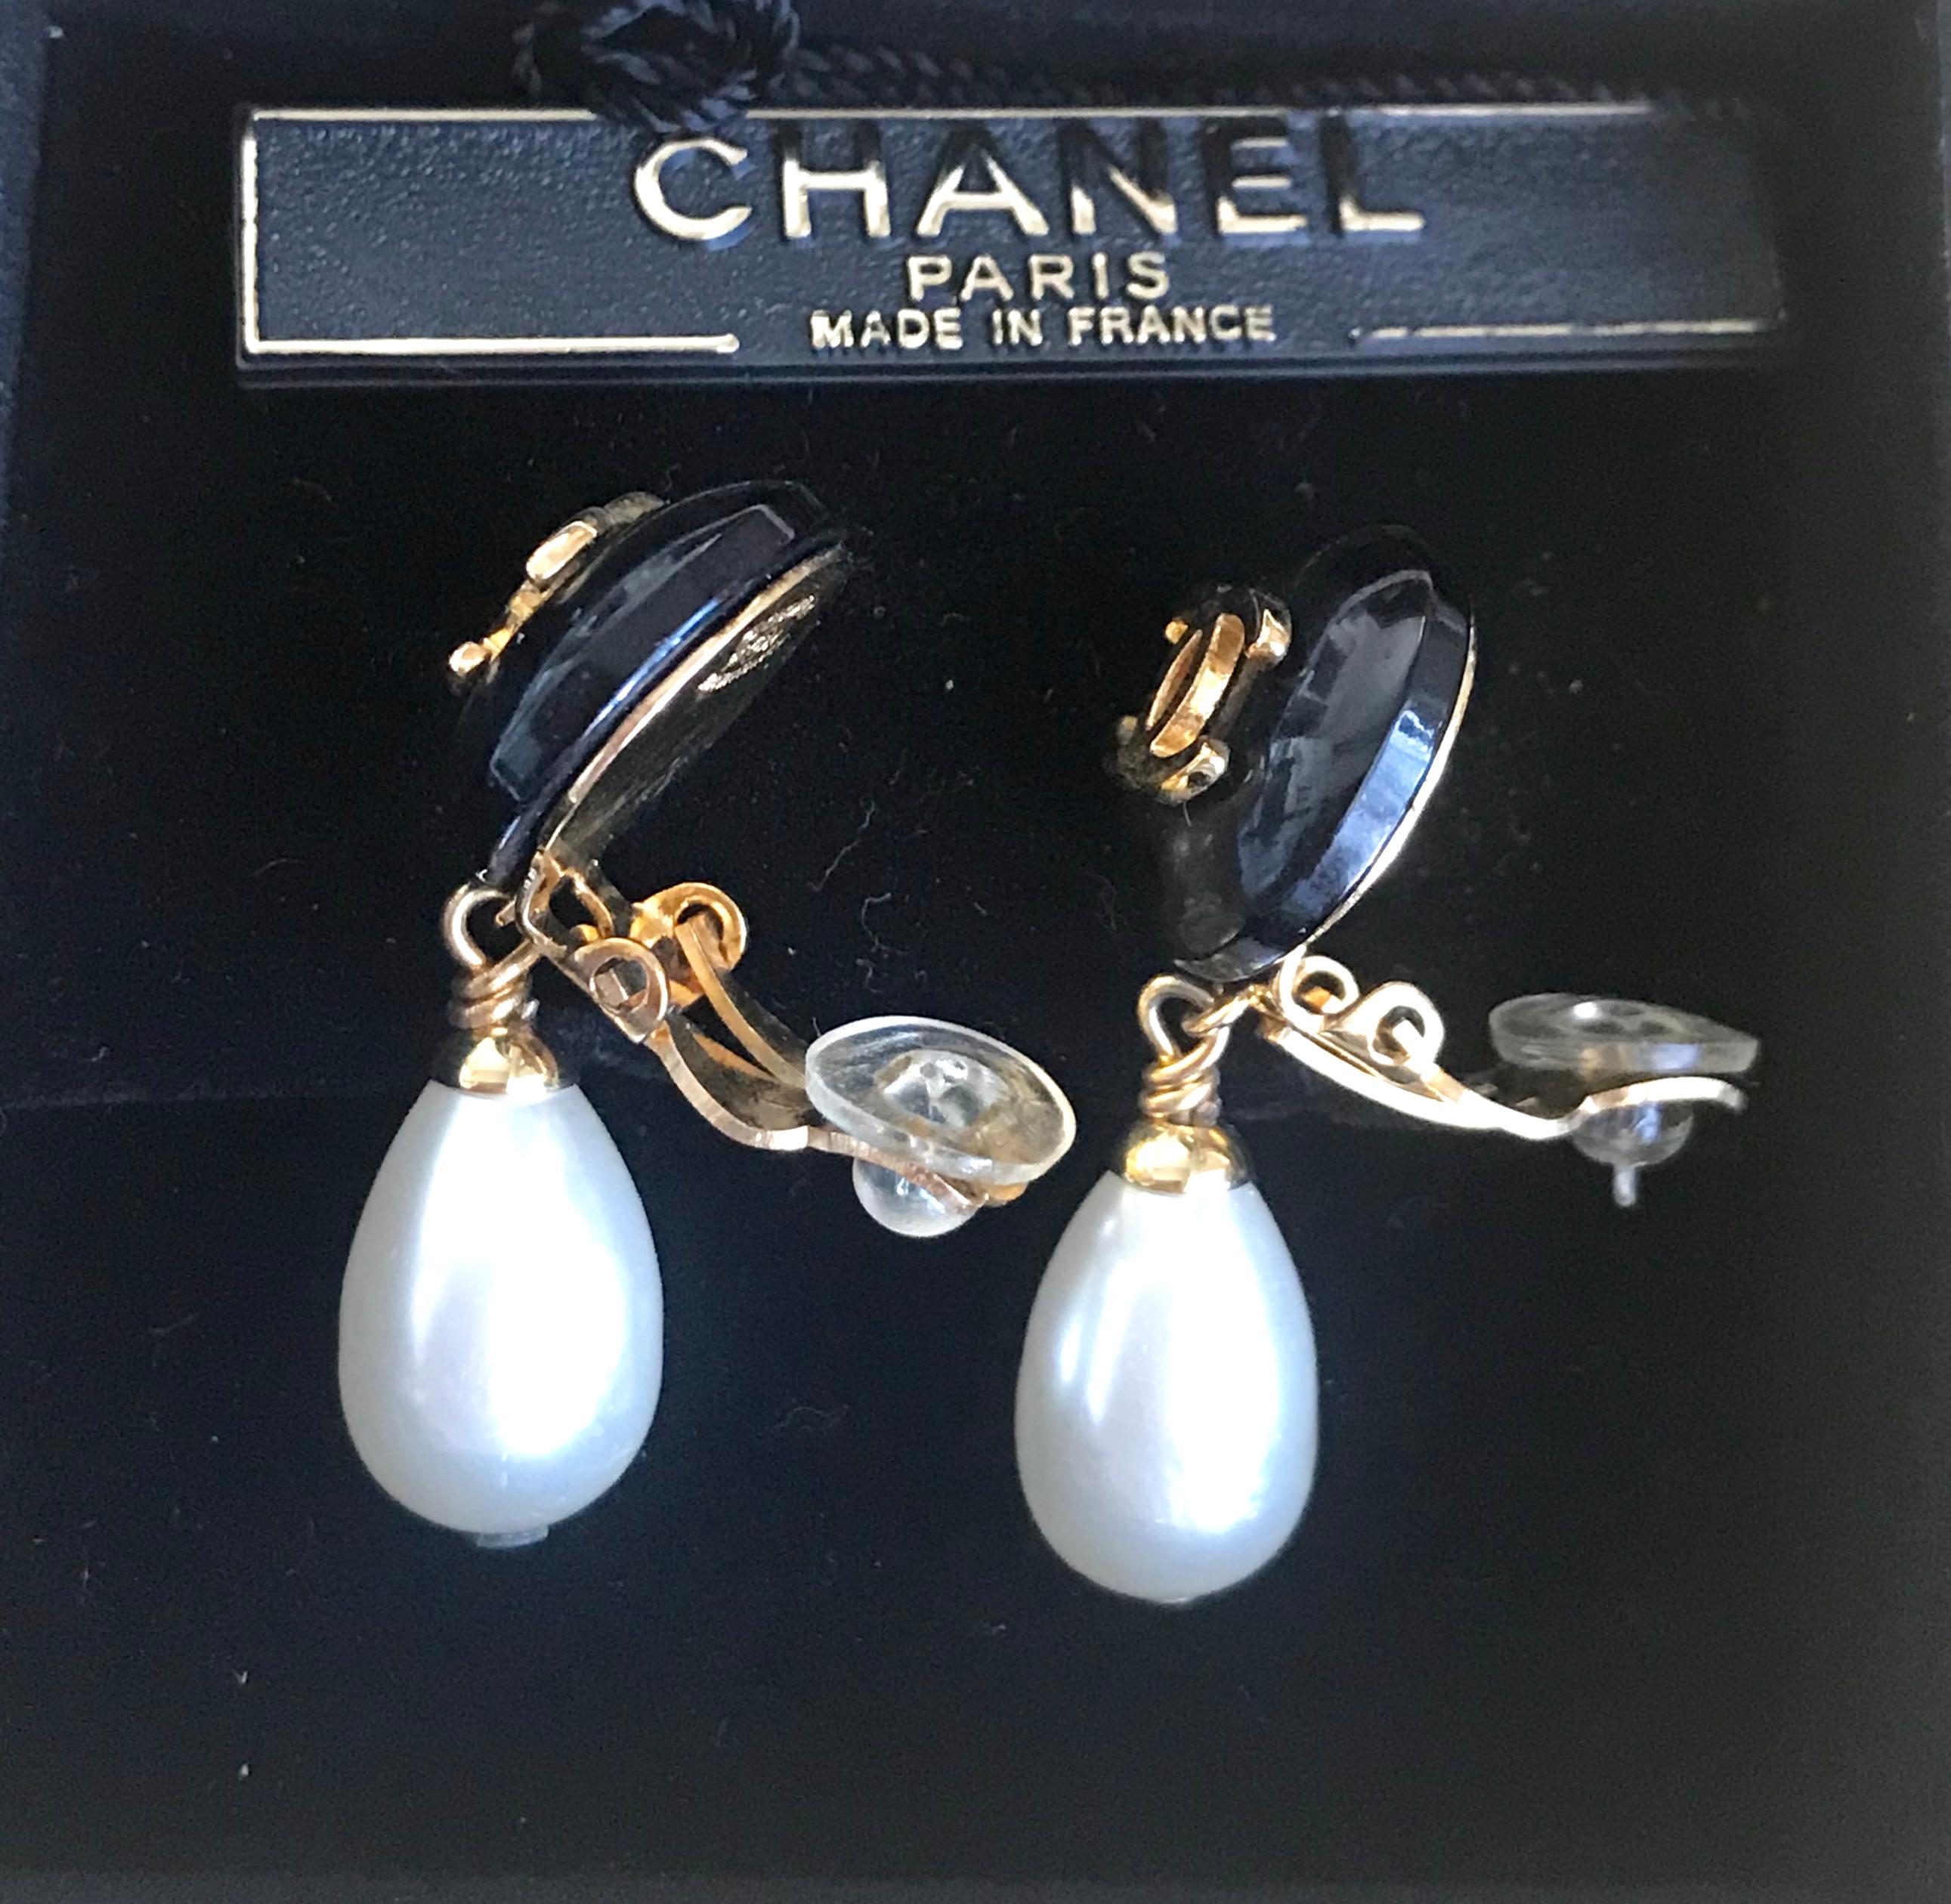 Vintage CHANEL teardrop white faux pearl earrings with black and golden CC mark In Good Condition For Sale In Kashiwa, Chiba